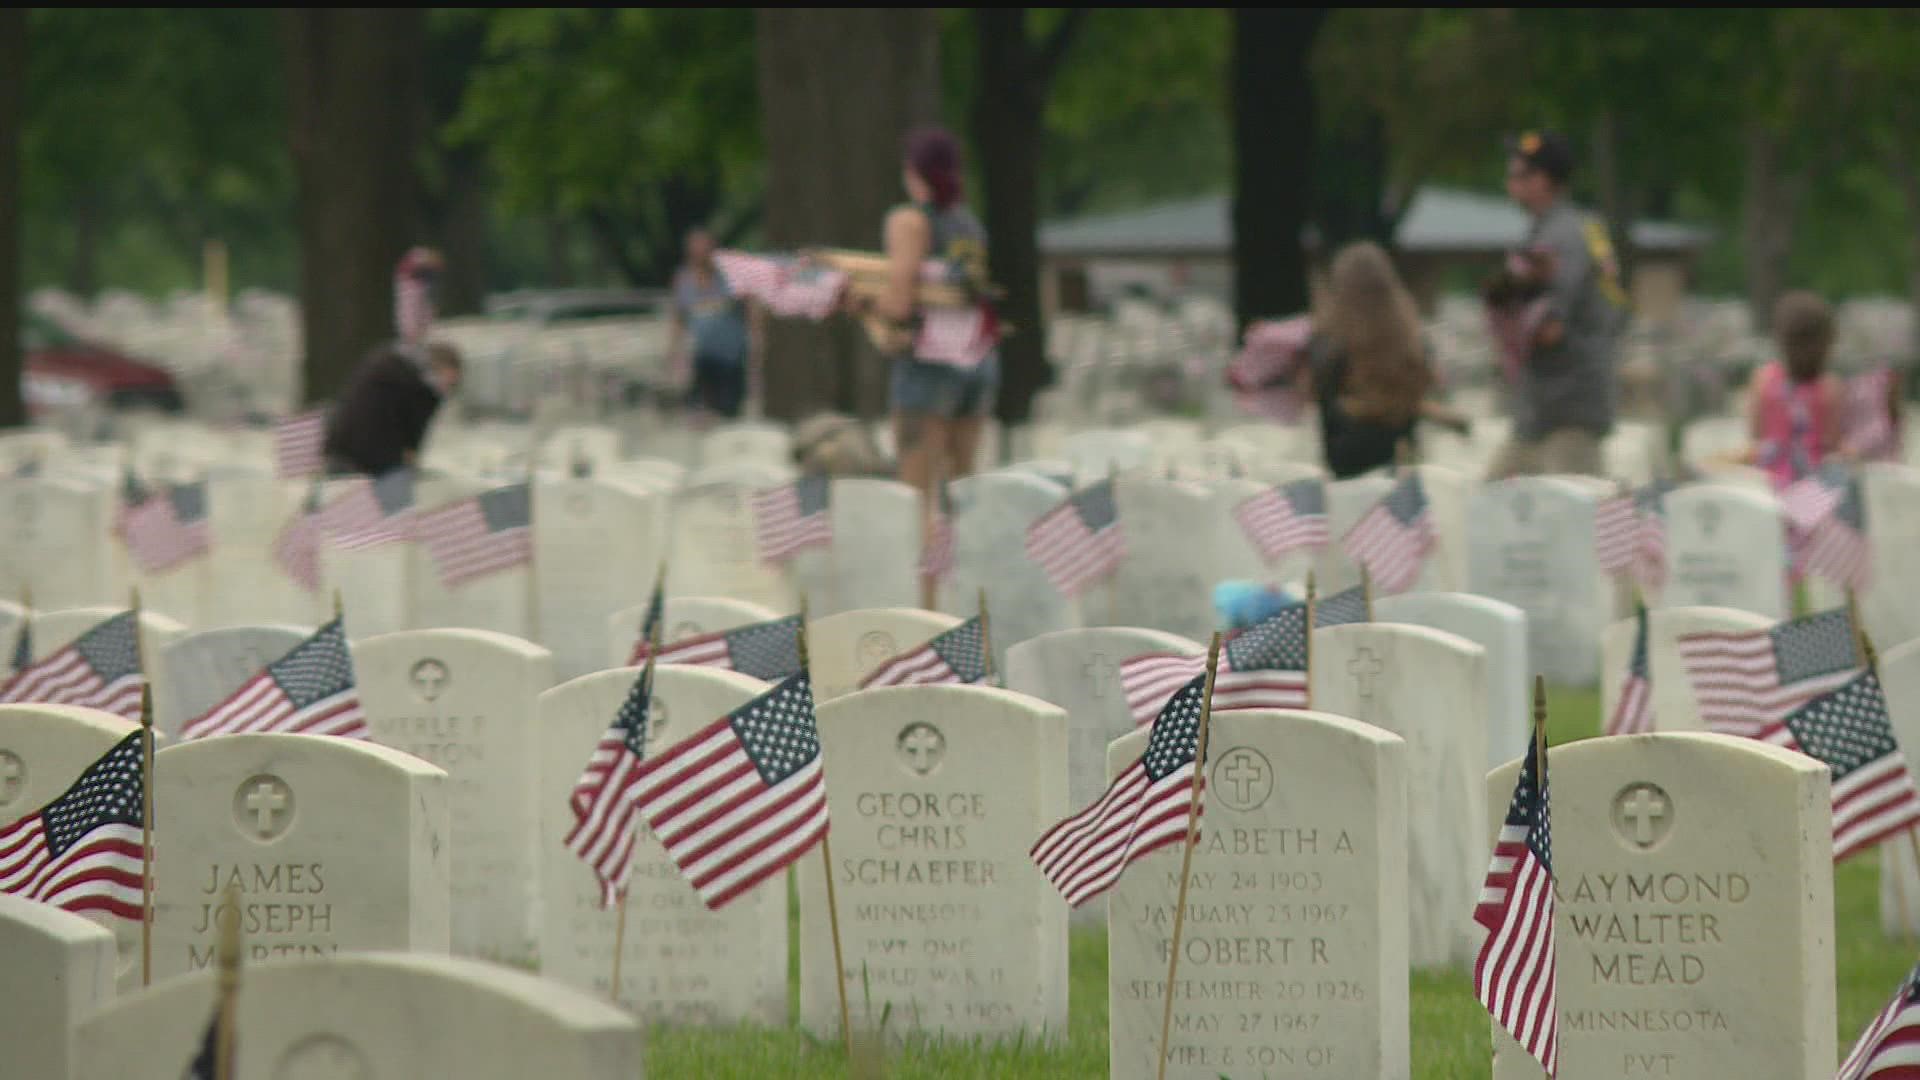 Volunteers with Flags for Fort Snelling began their work at the crack of dawn on Sunday in advance of Memorial Day.